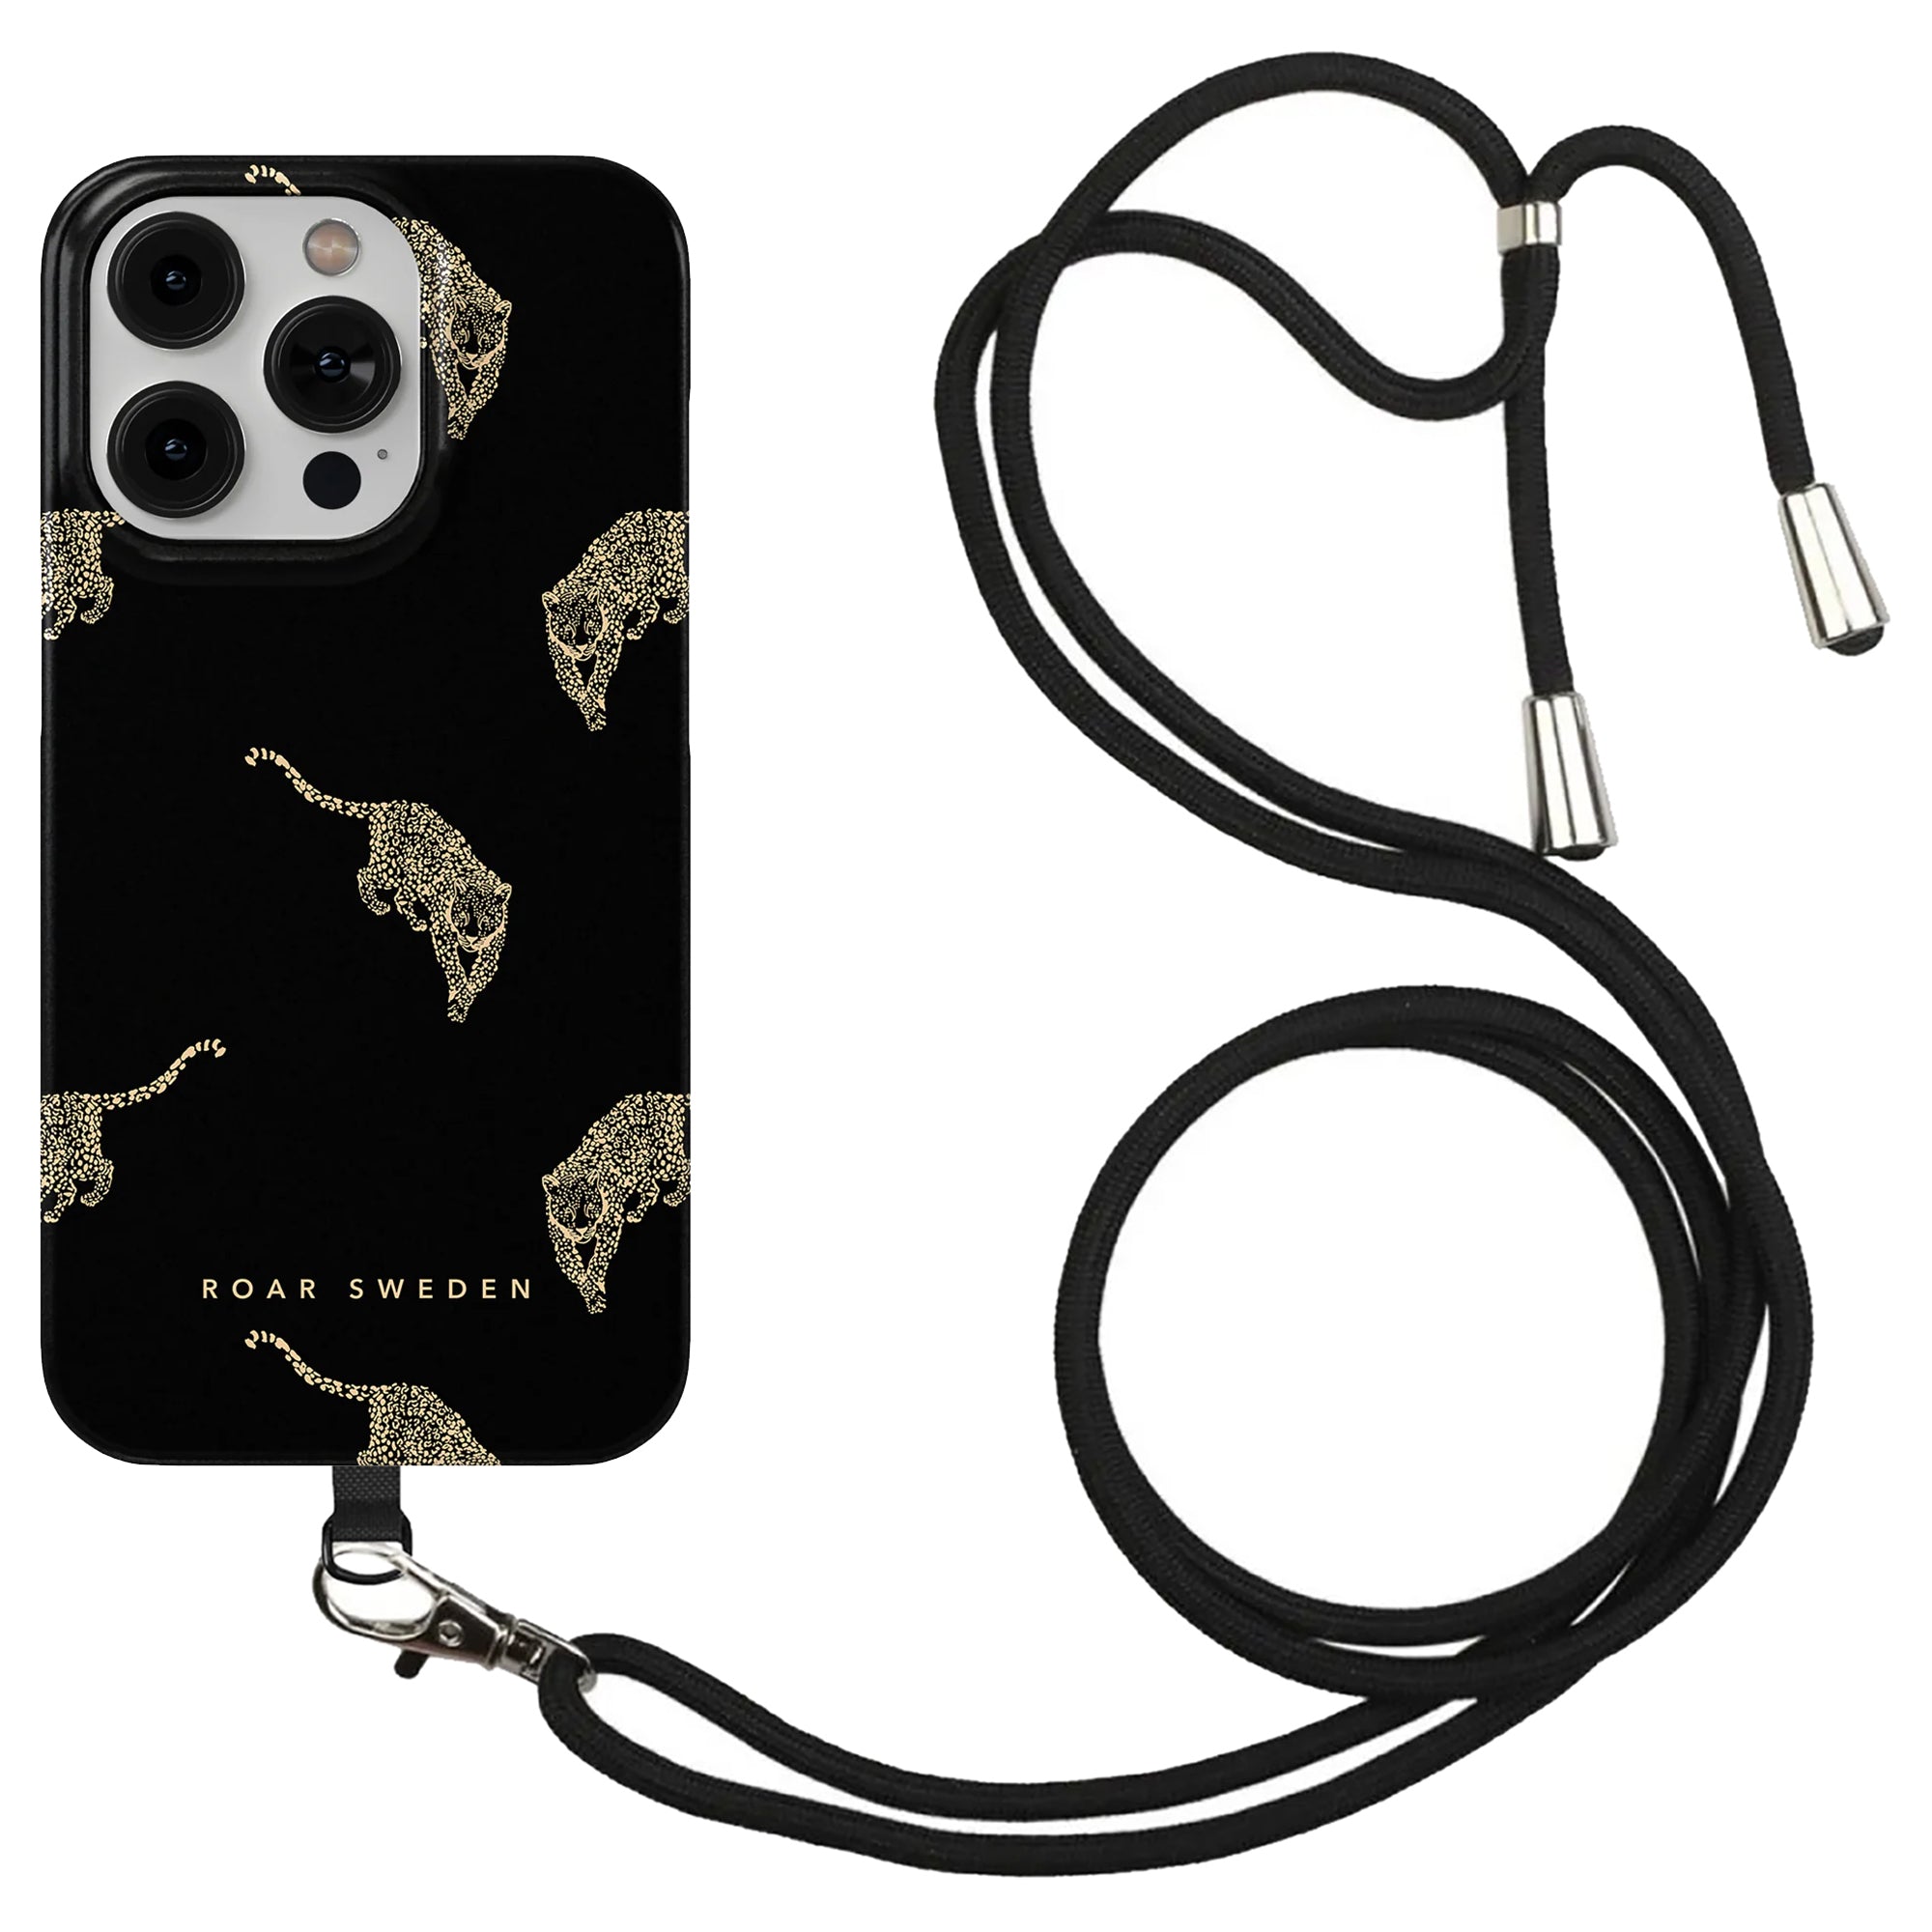 A black smartphone case with gold leopard designs and the text "Roar Sweden" is attached to a Mobilhalsband för mobilskal - Svart, featuring a black lanyard with silver accents.